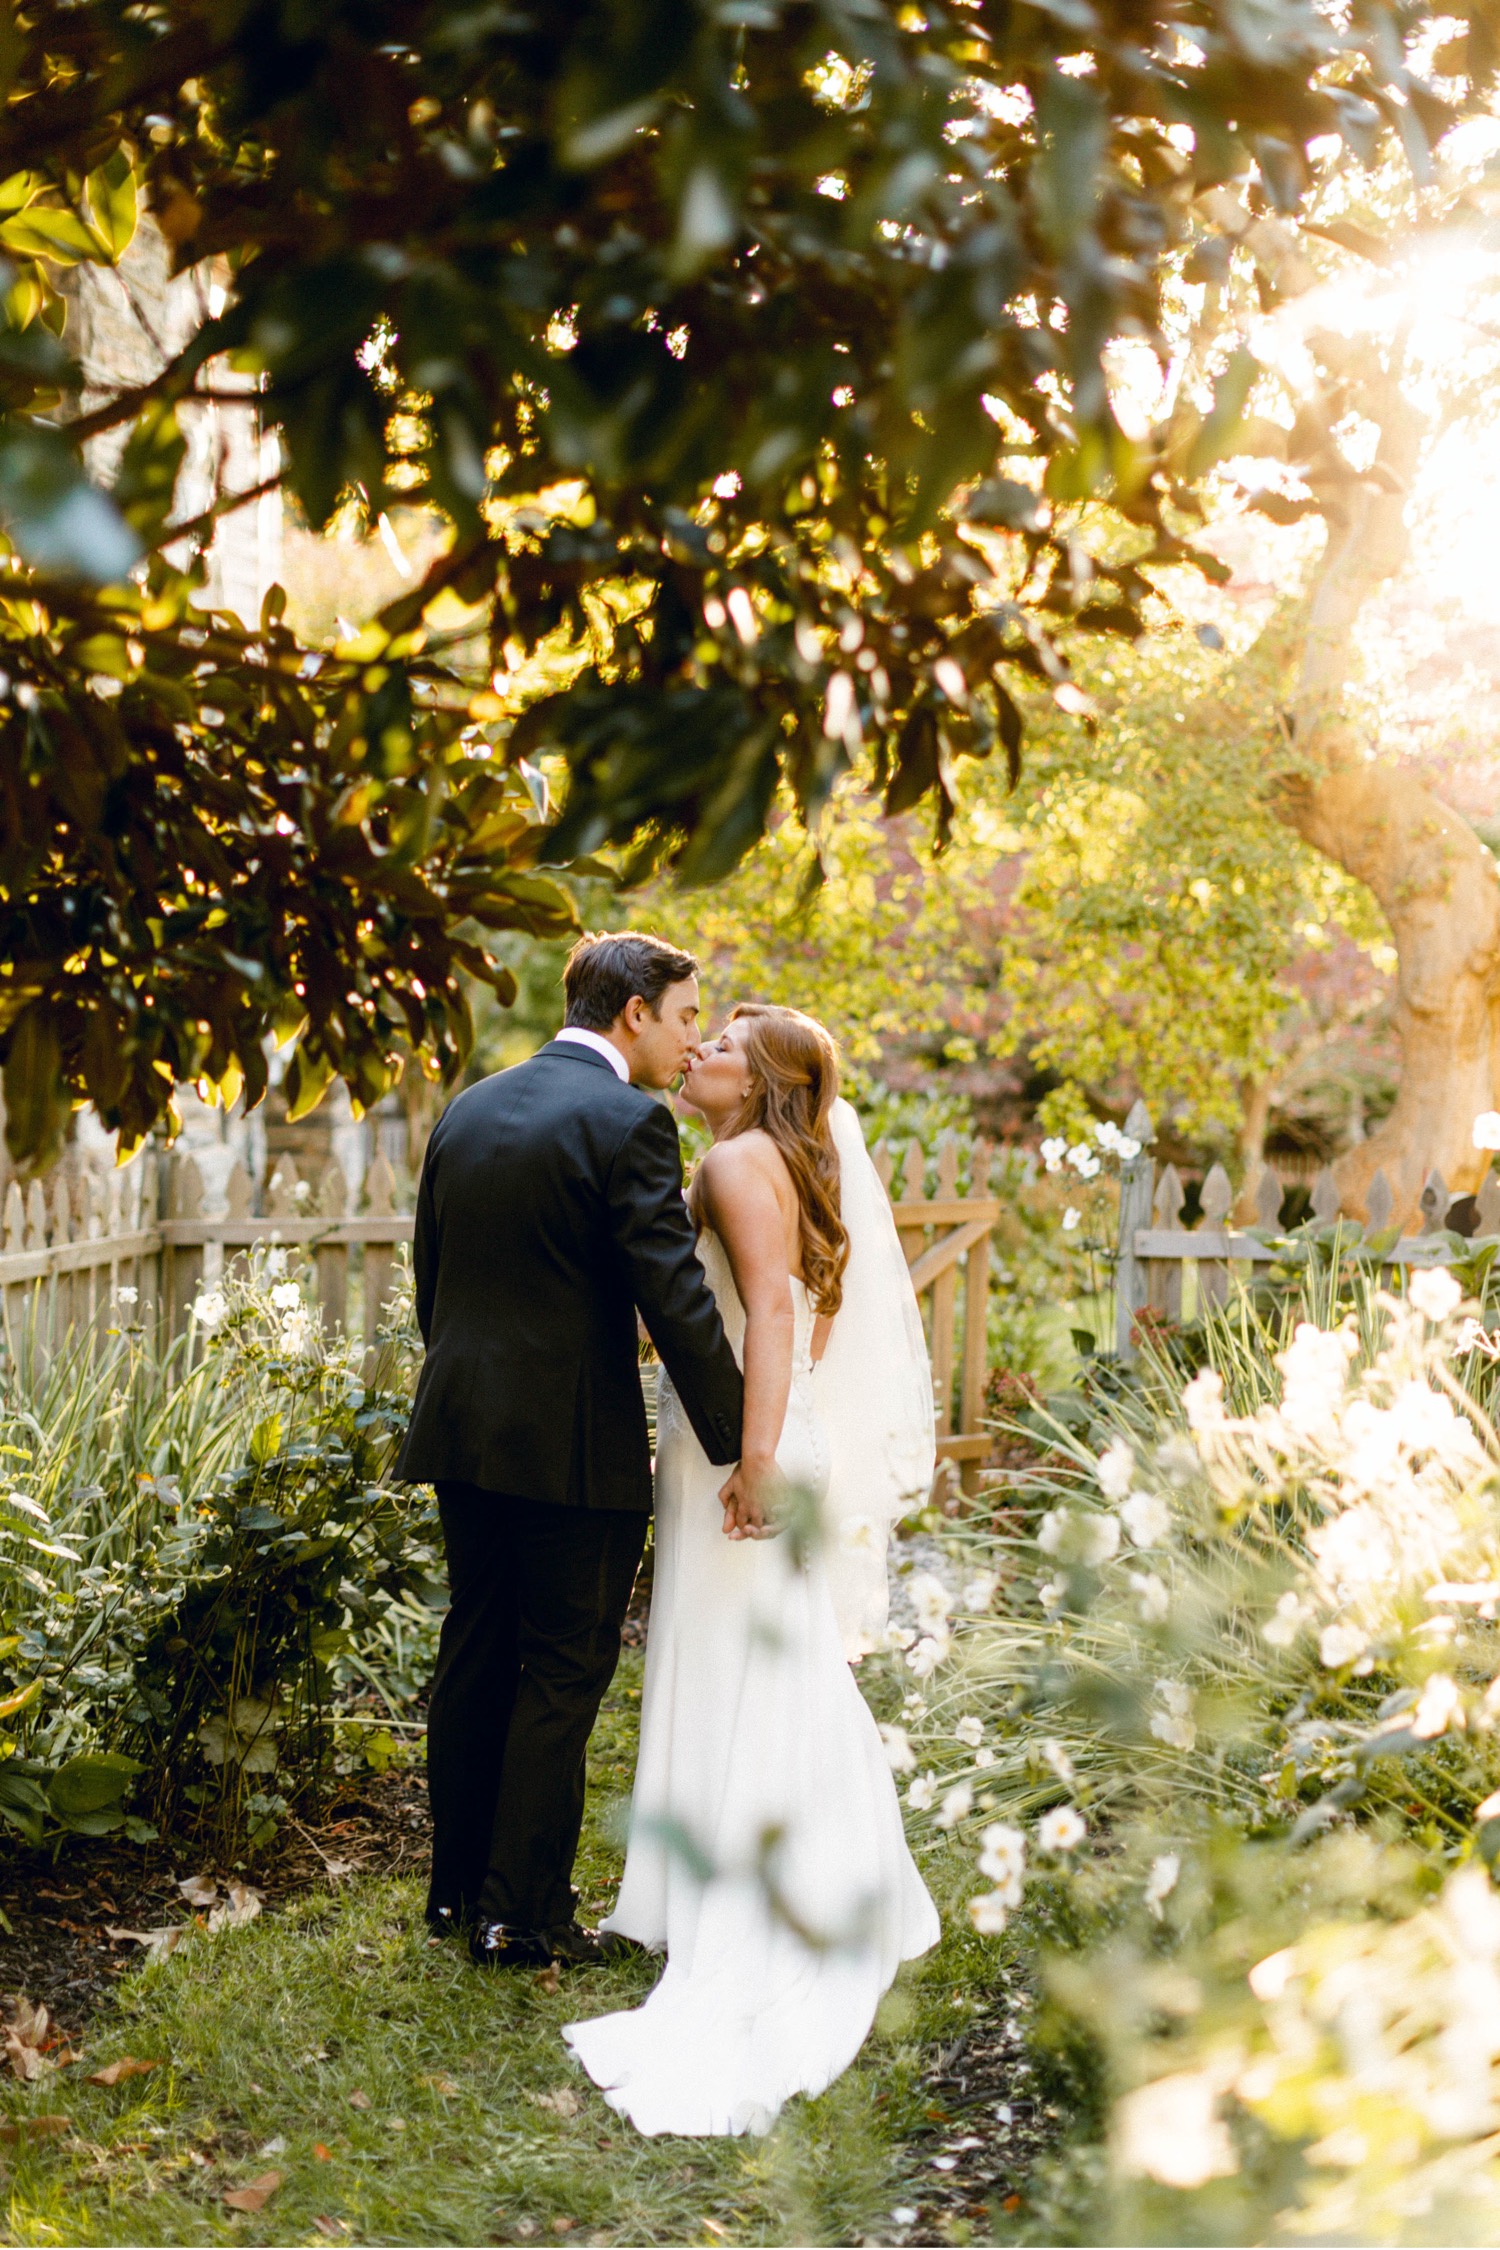 bride and groom kissing after wedding ceremony luxurious backyard wedding